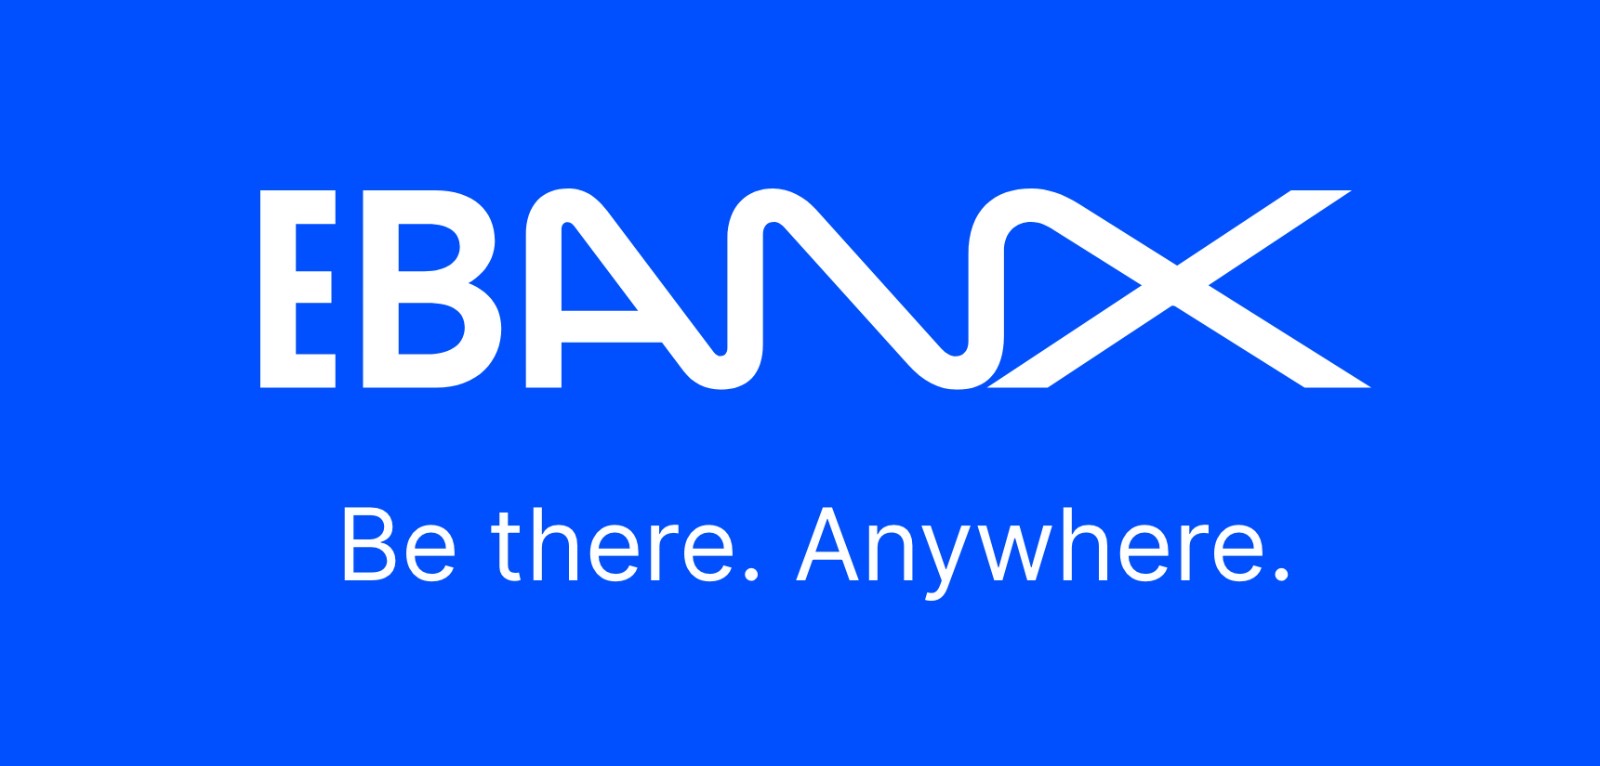 EBANX Announces Expansion of Global Teams Led by Paula Bellizia, New President